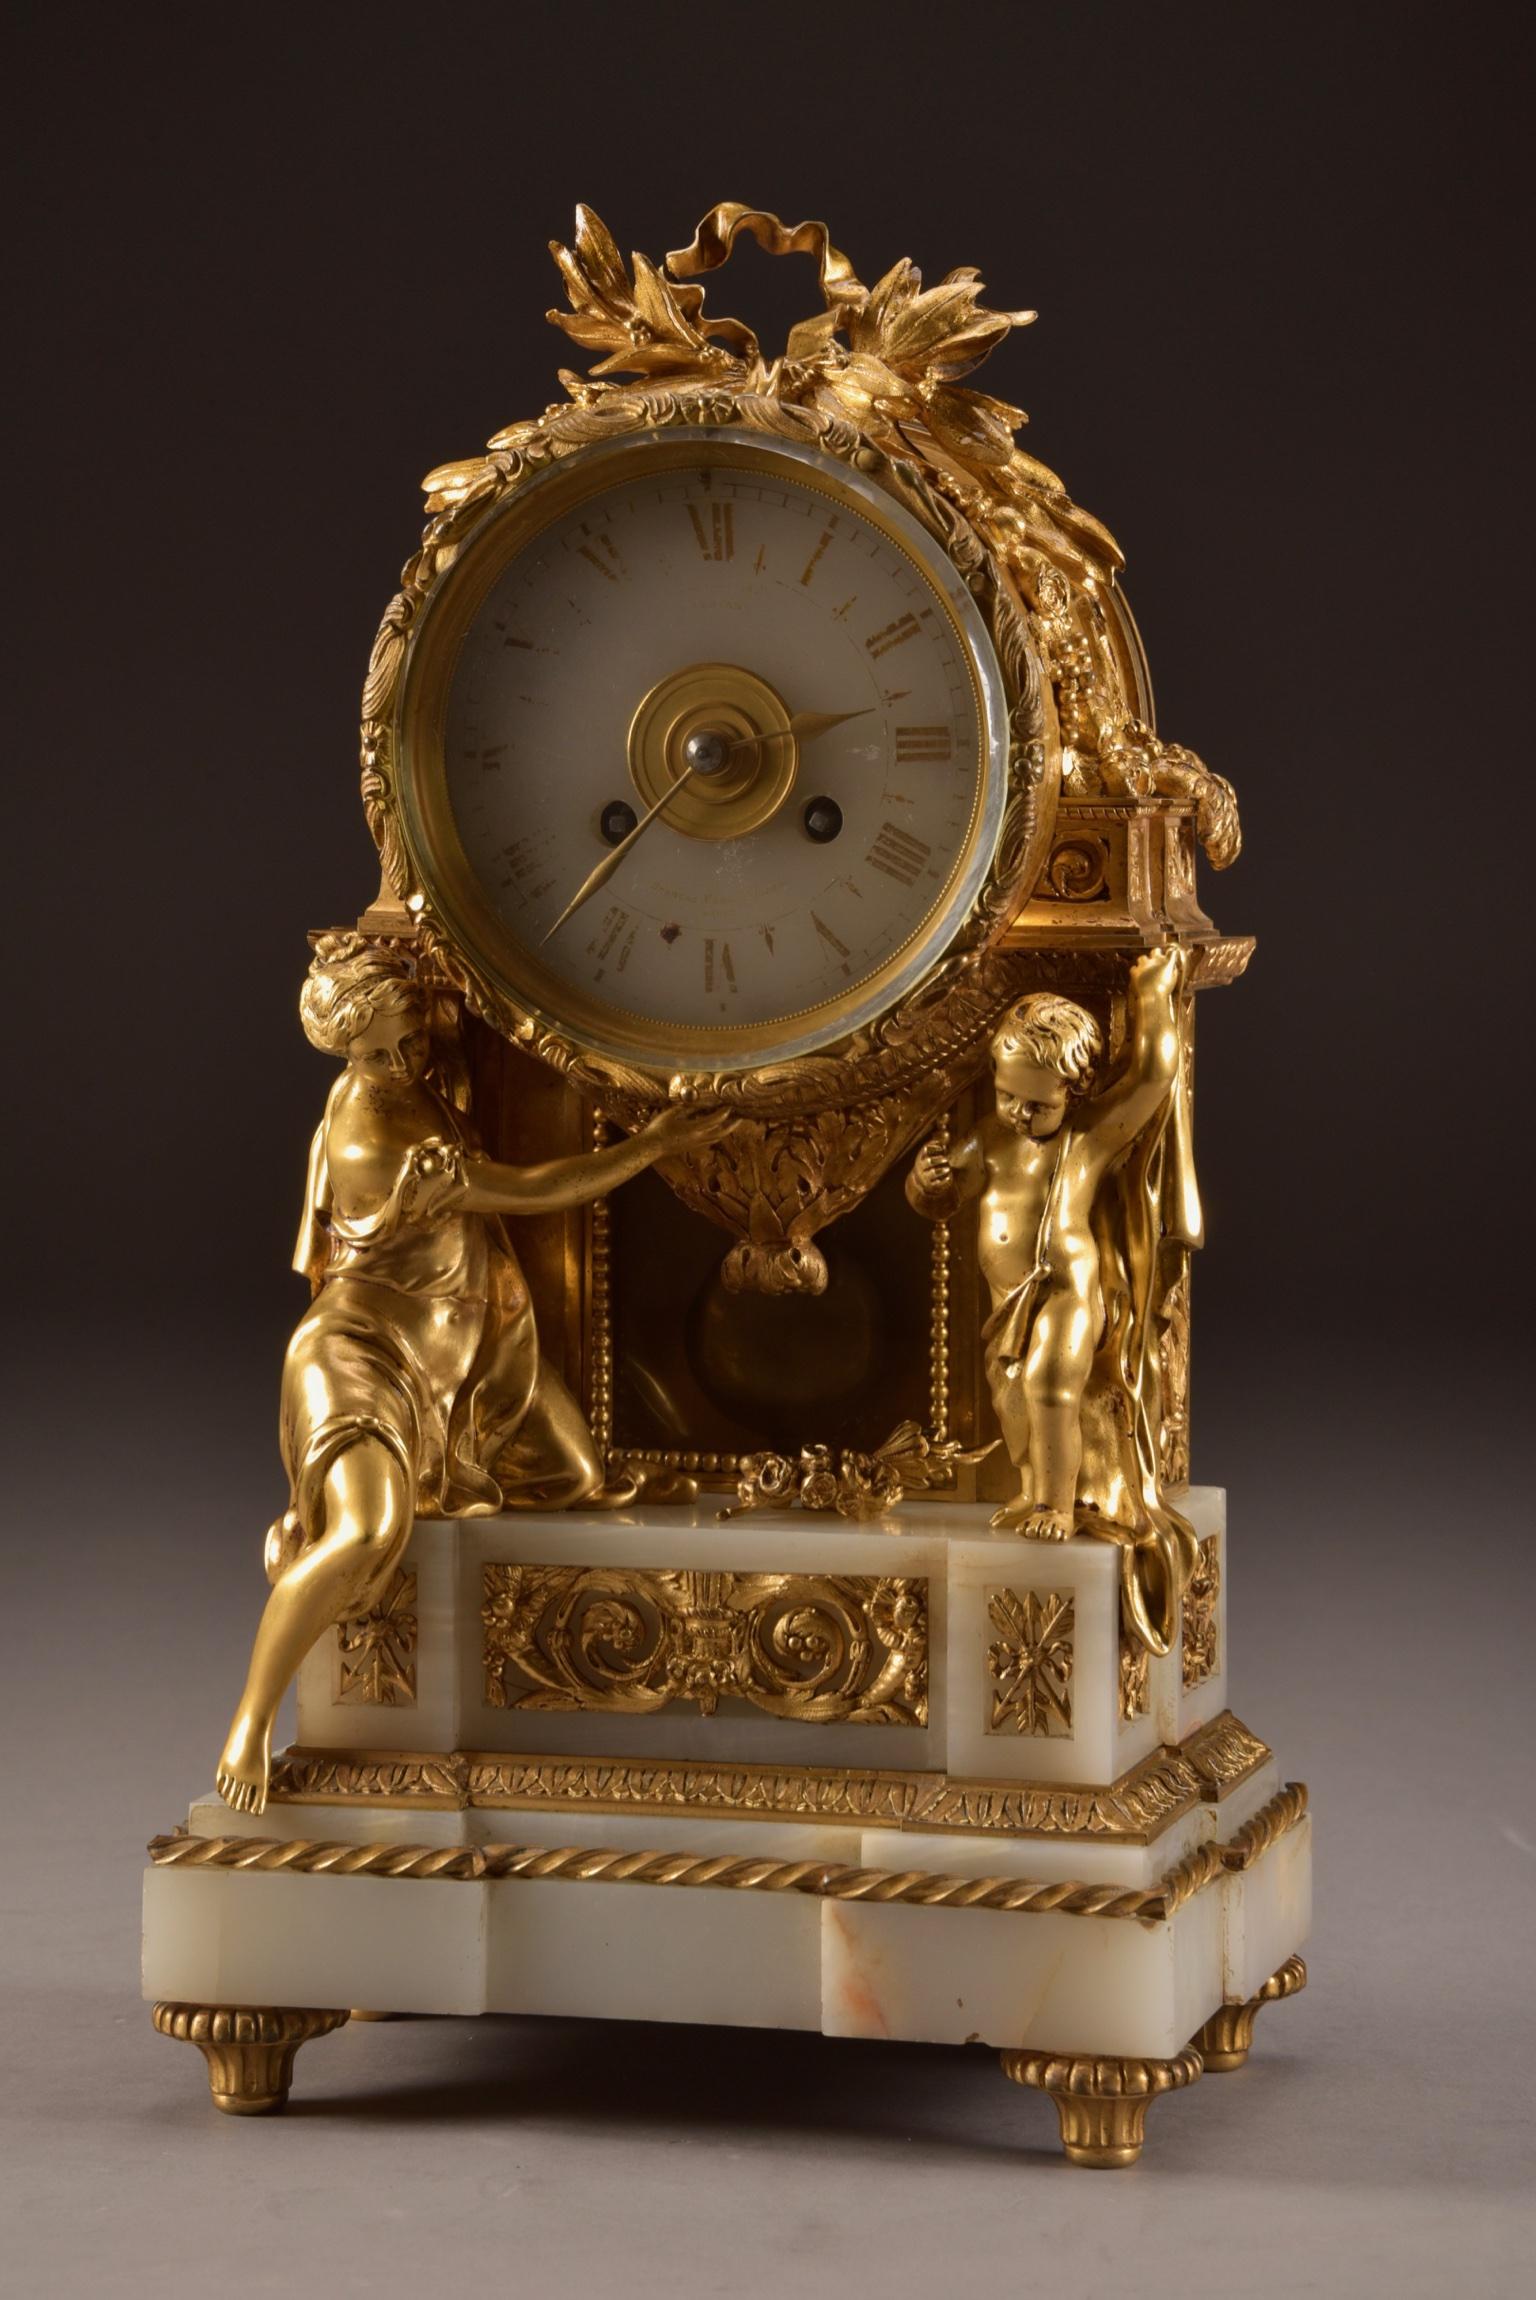 19th Century Impressive Clock, Image of a Beautiful Woman and Cherub Carrying a Clock For Sale